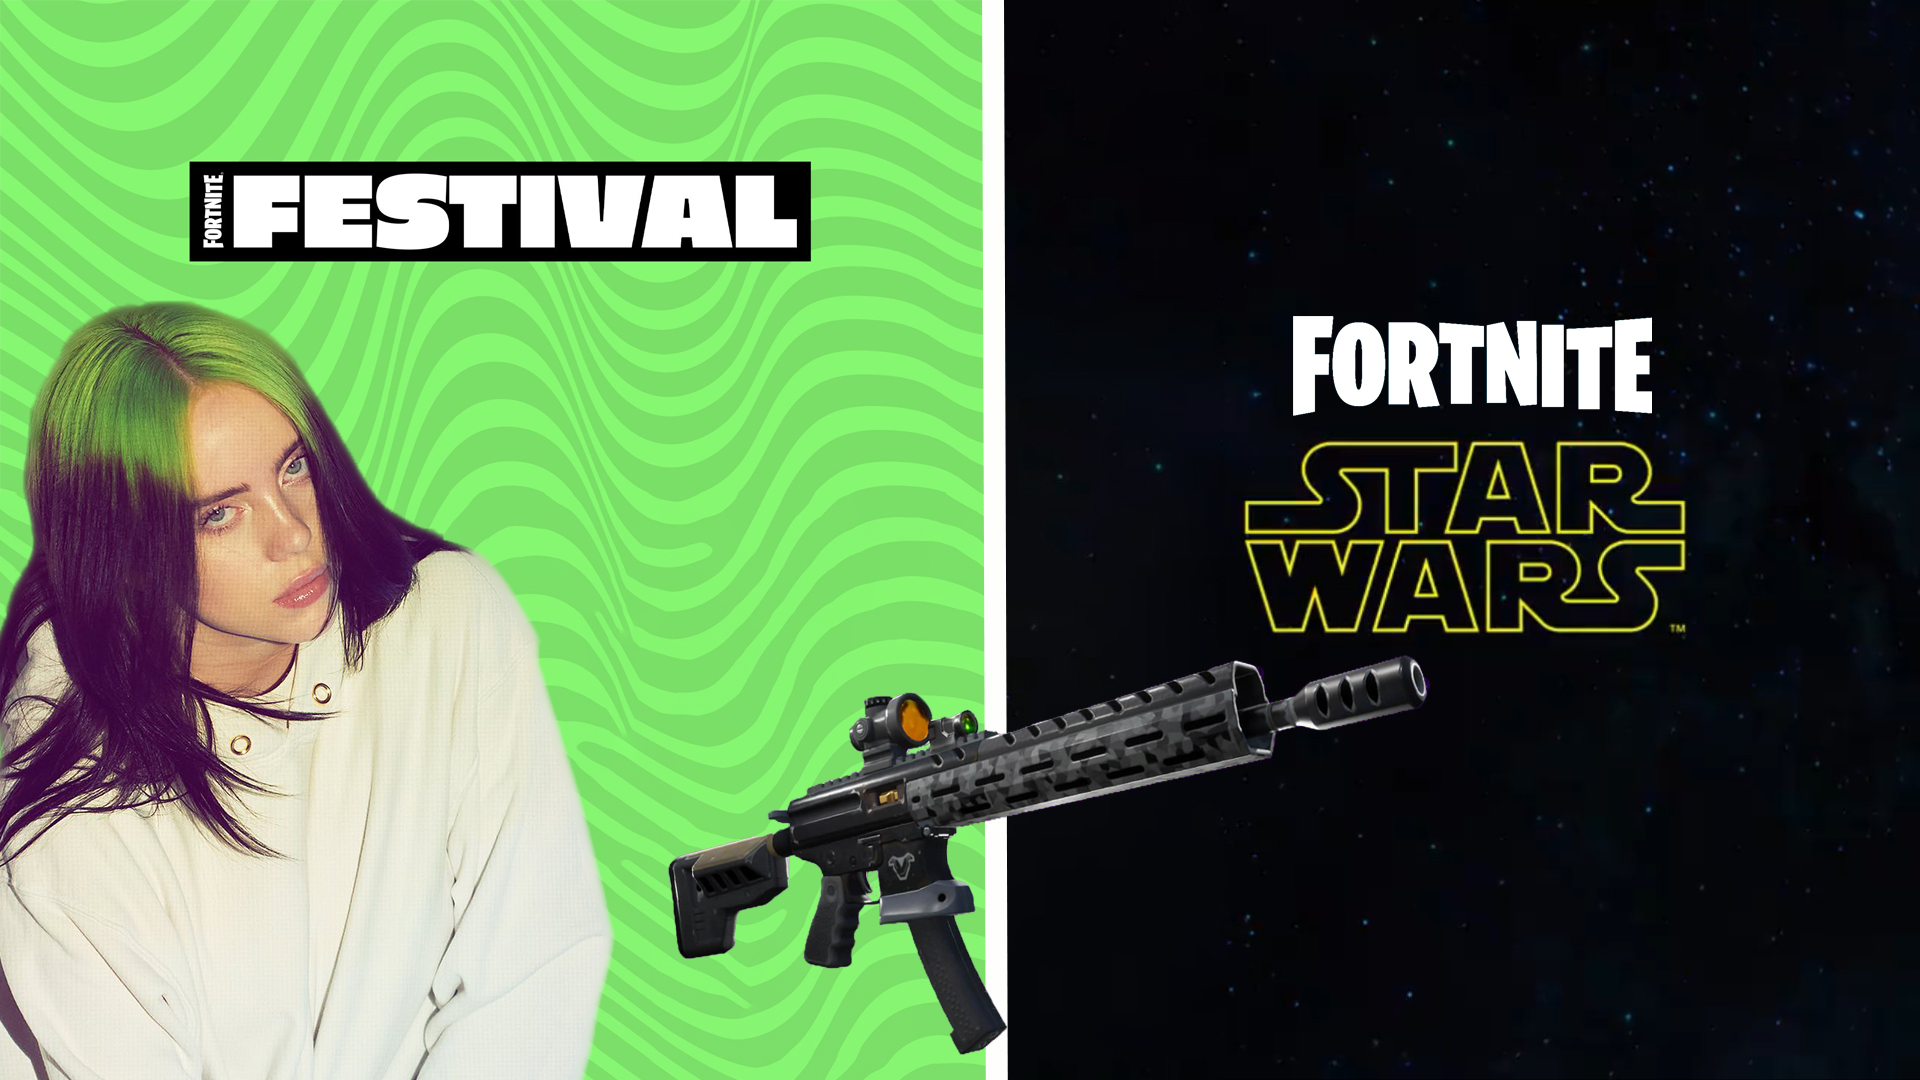 fortnite patch v.29.30: downtime, star wars, billie eilish, festival season 3, new weapons, collabs & more